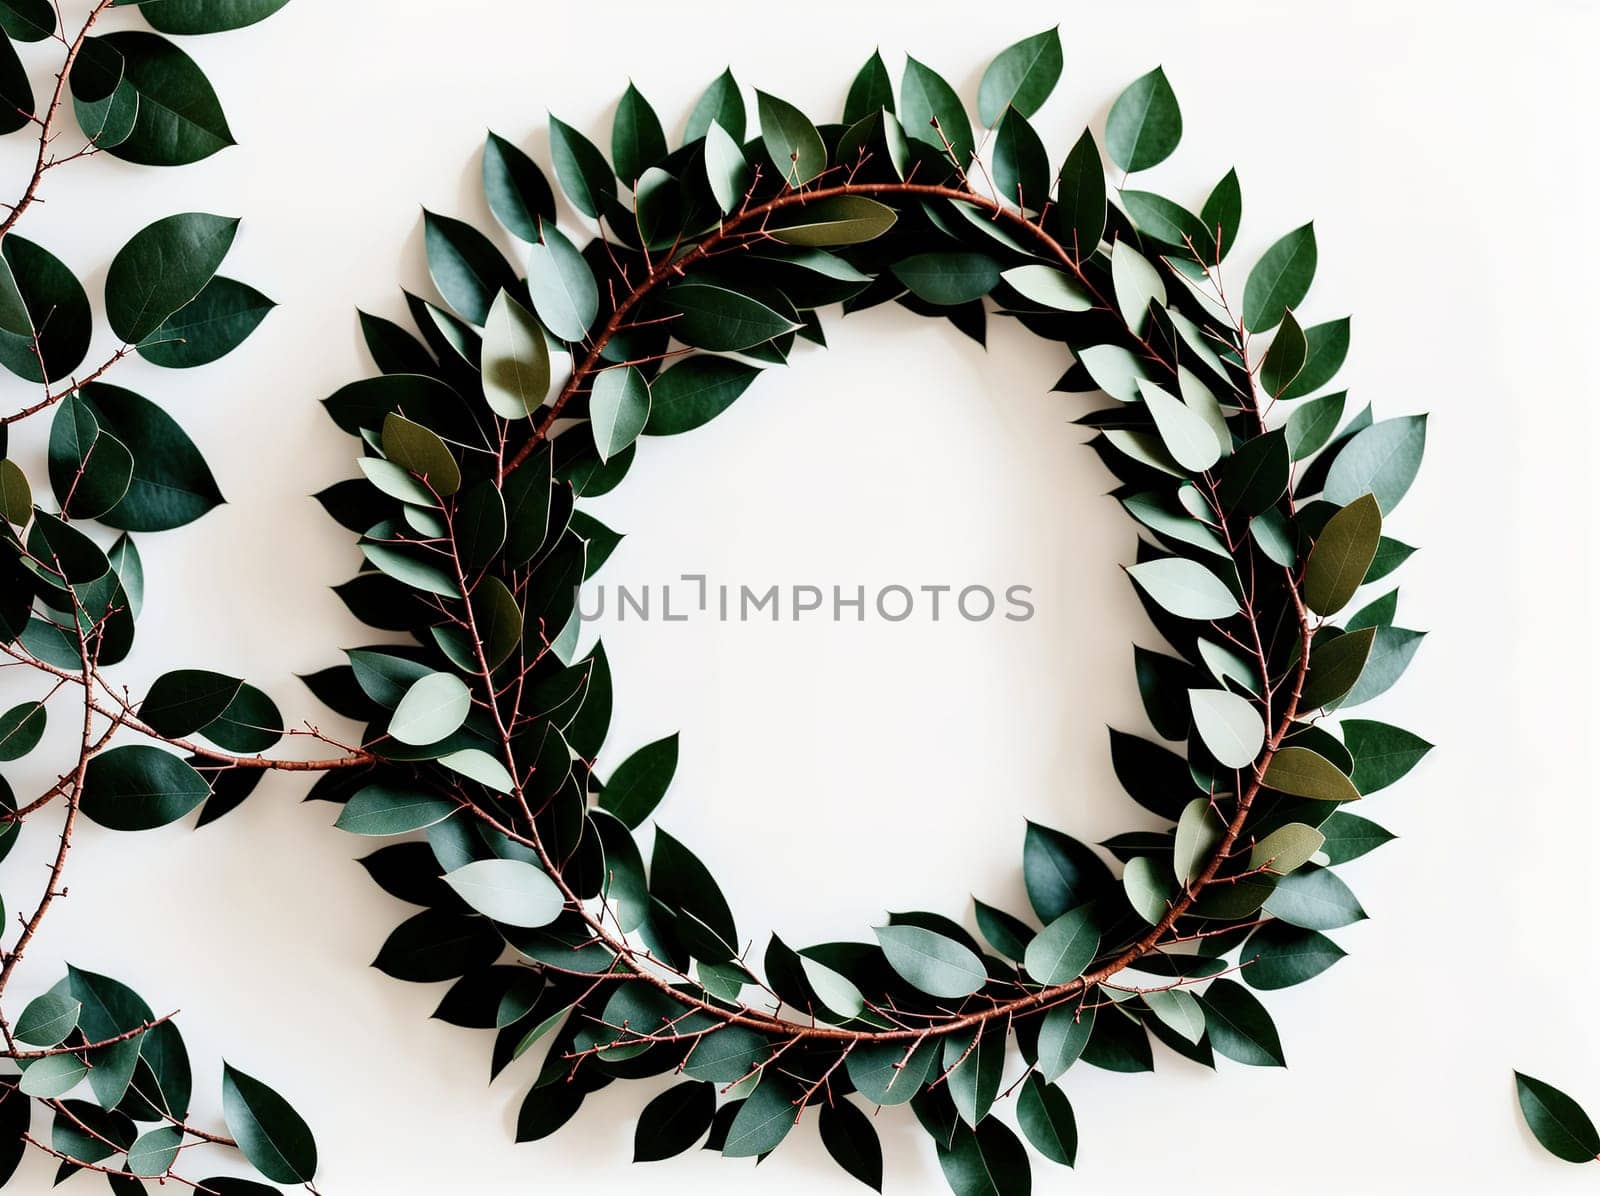 The image is a wreath made of green leaves and branches, hanging on a white wall.